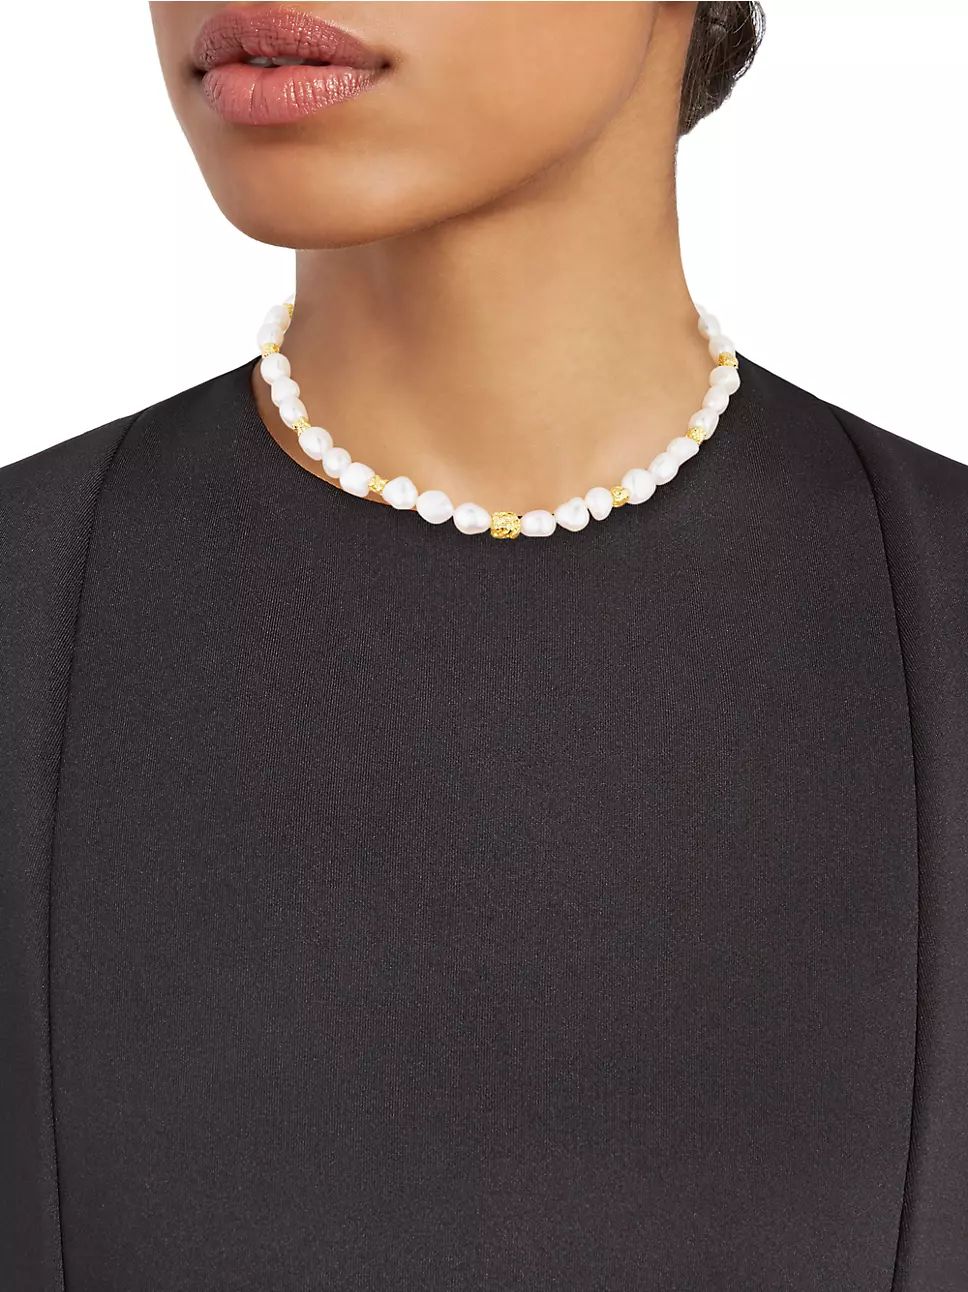 Alaine 24K Gold-Plated & Freshwater Pearl Necklace | Saks Fifth Avenue